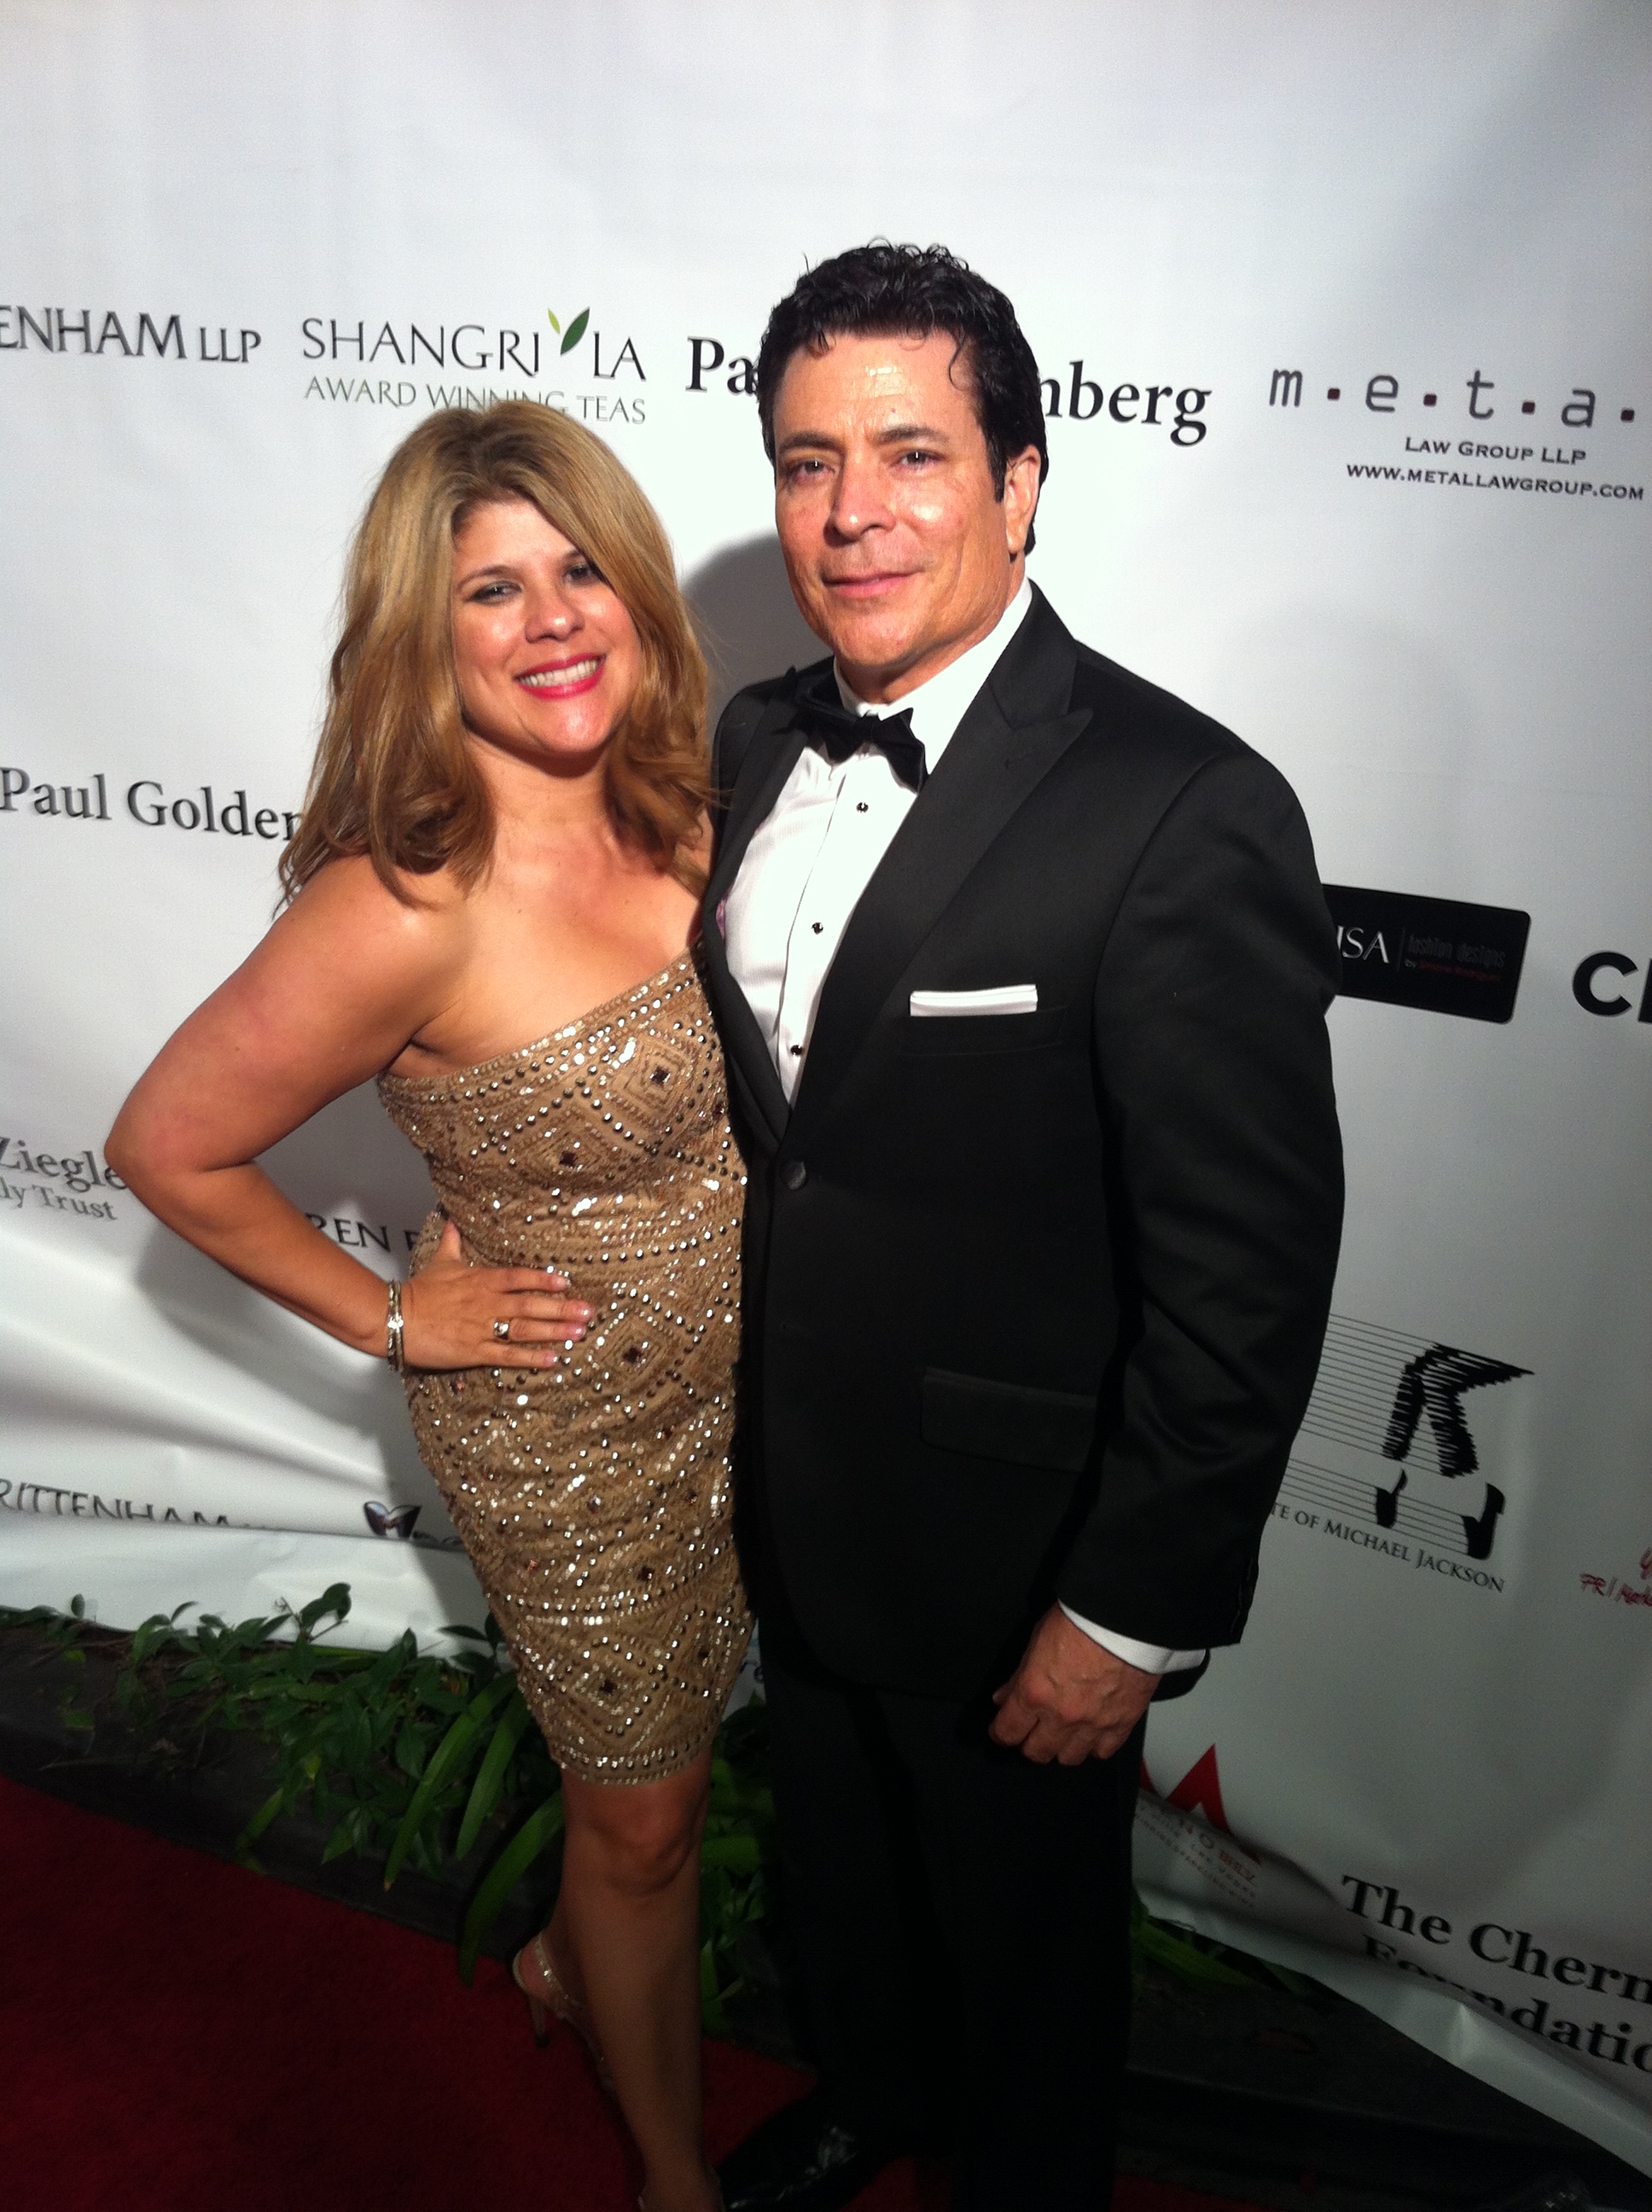 Writer/Director Daniel R. Chavez with publicist Yvette Morales of YM & Associates on Red Carpet at Children Uniting Nations Oscar after party in Beverly Hills,CA